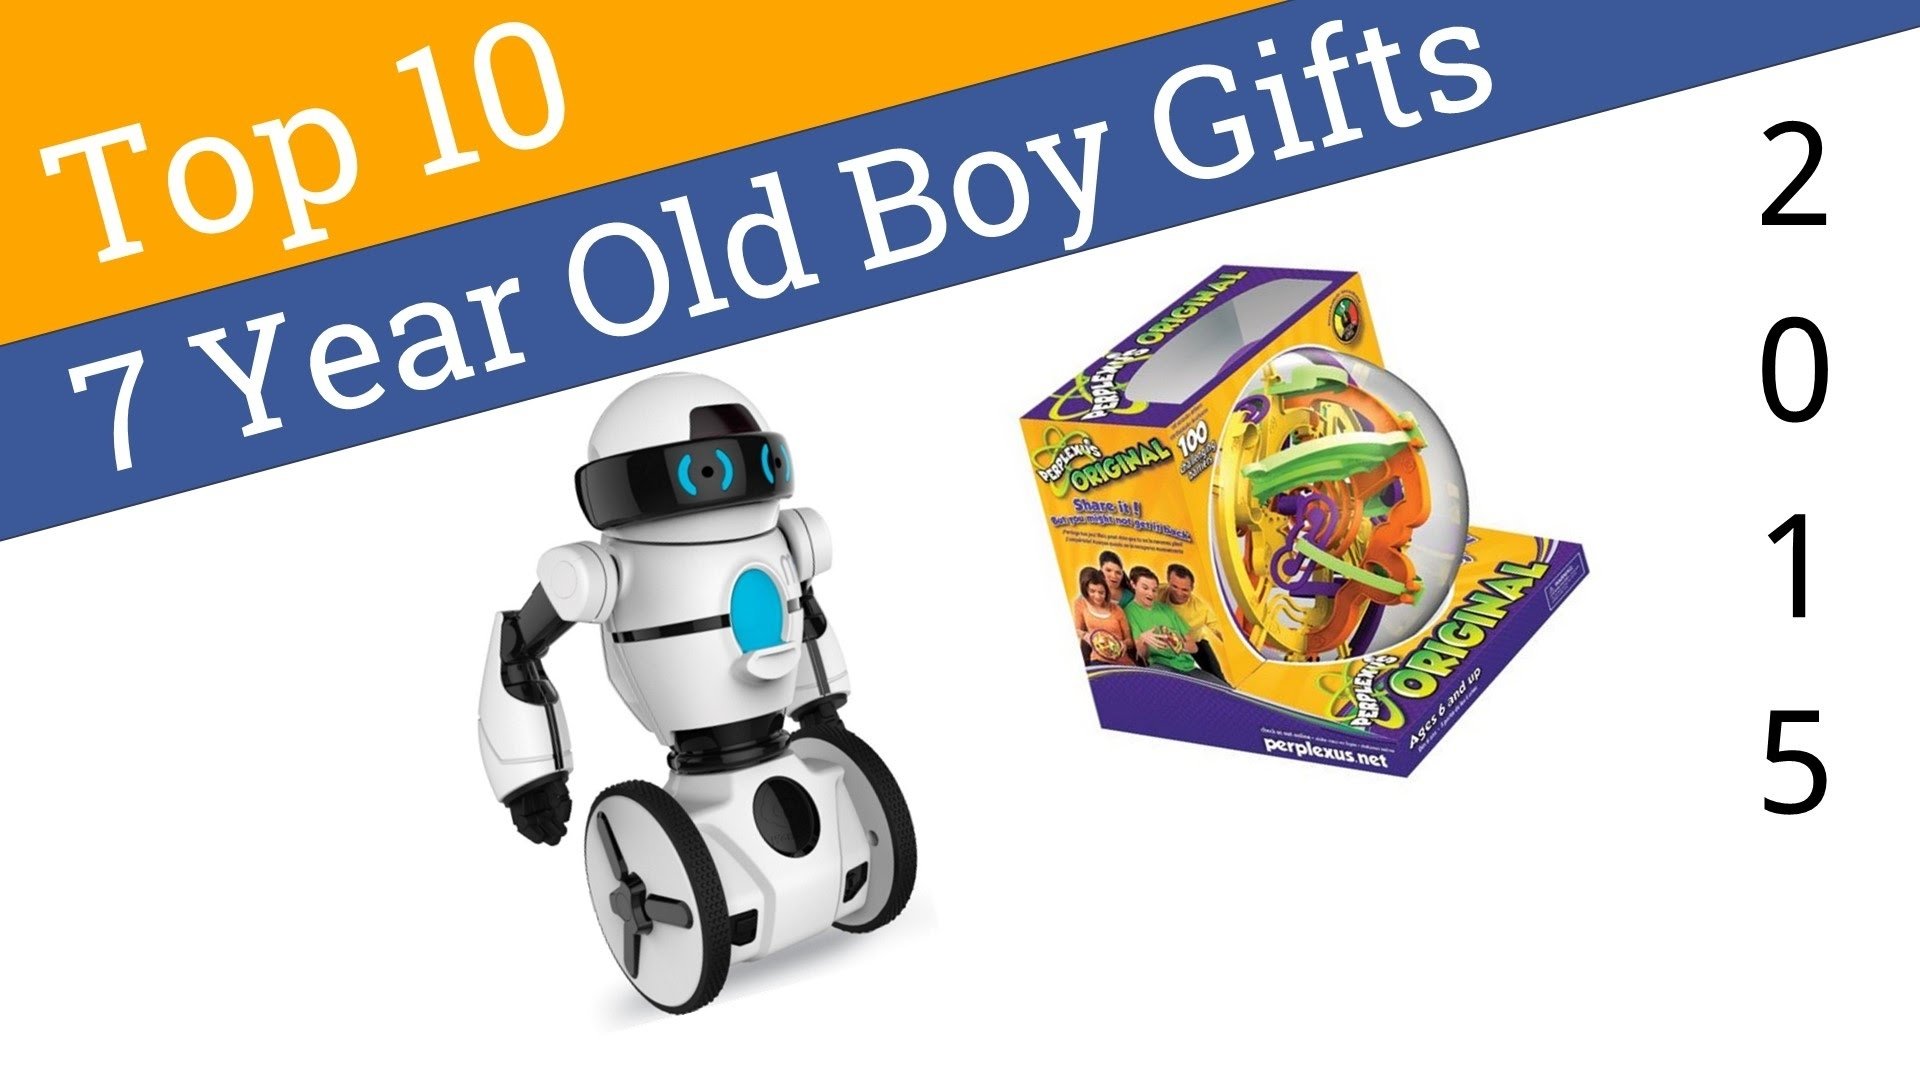 10 Lovely 7 Year Old Boy Gift Ideas 10 best 7 year old boy gifts 2015 youtube 6 2024